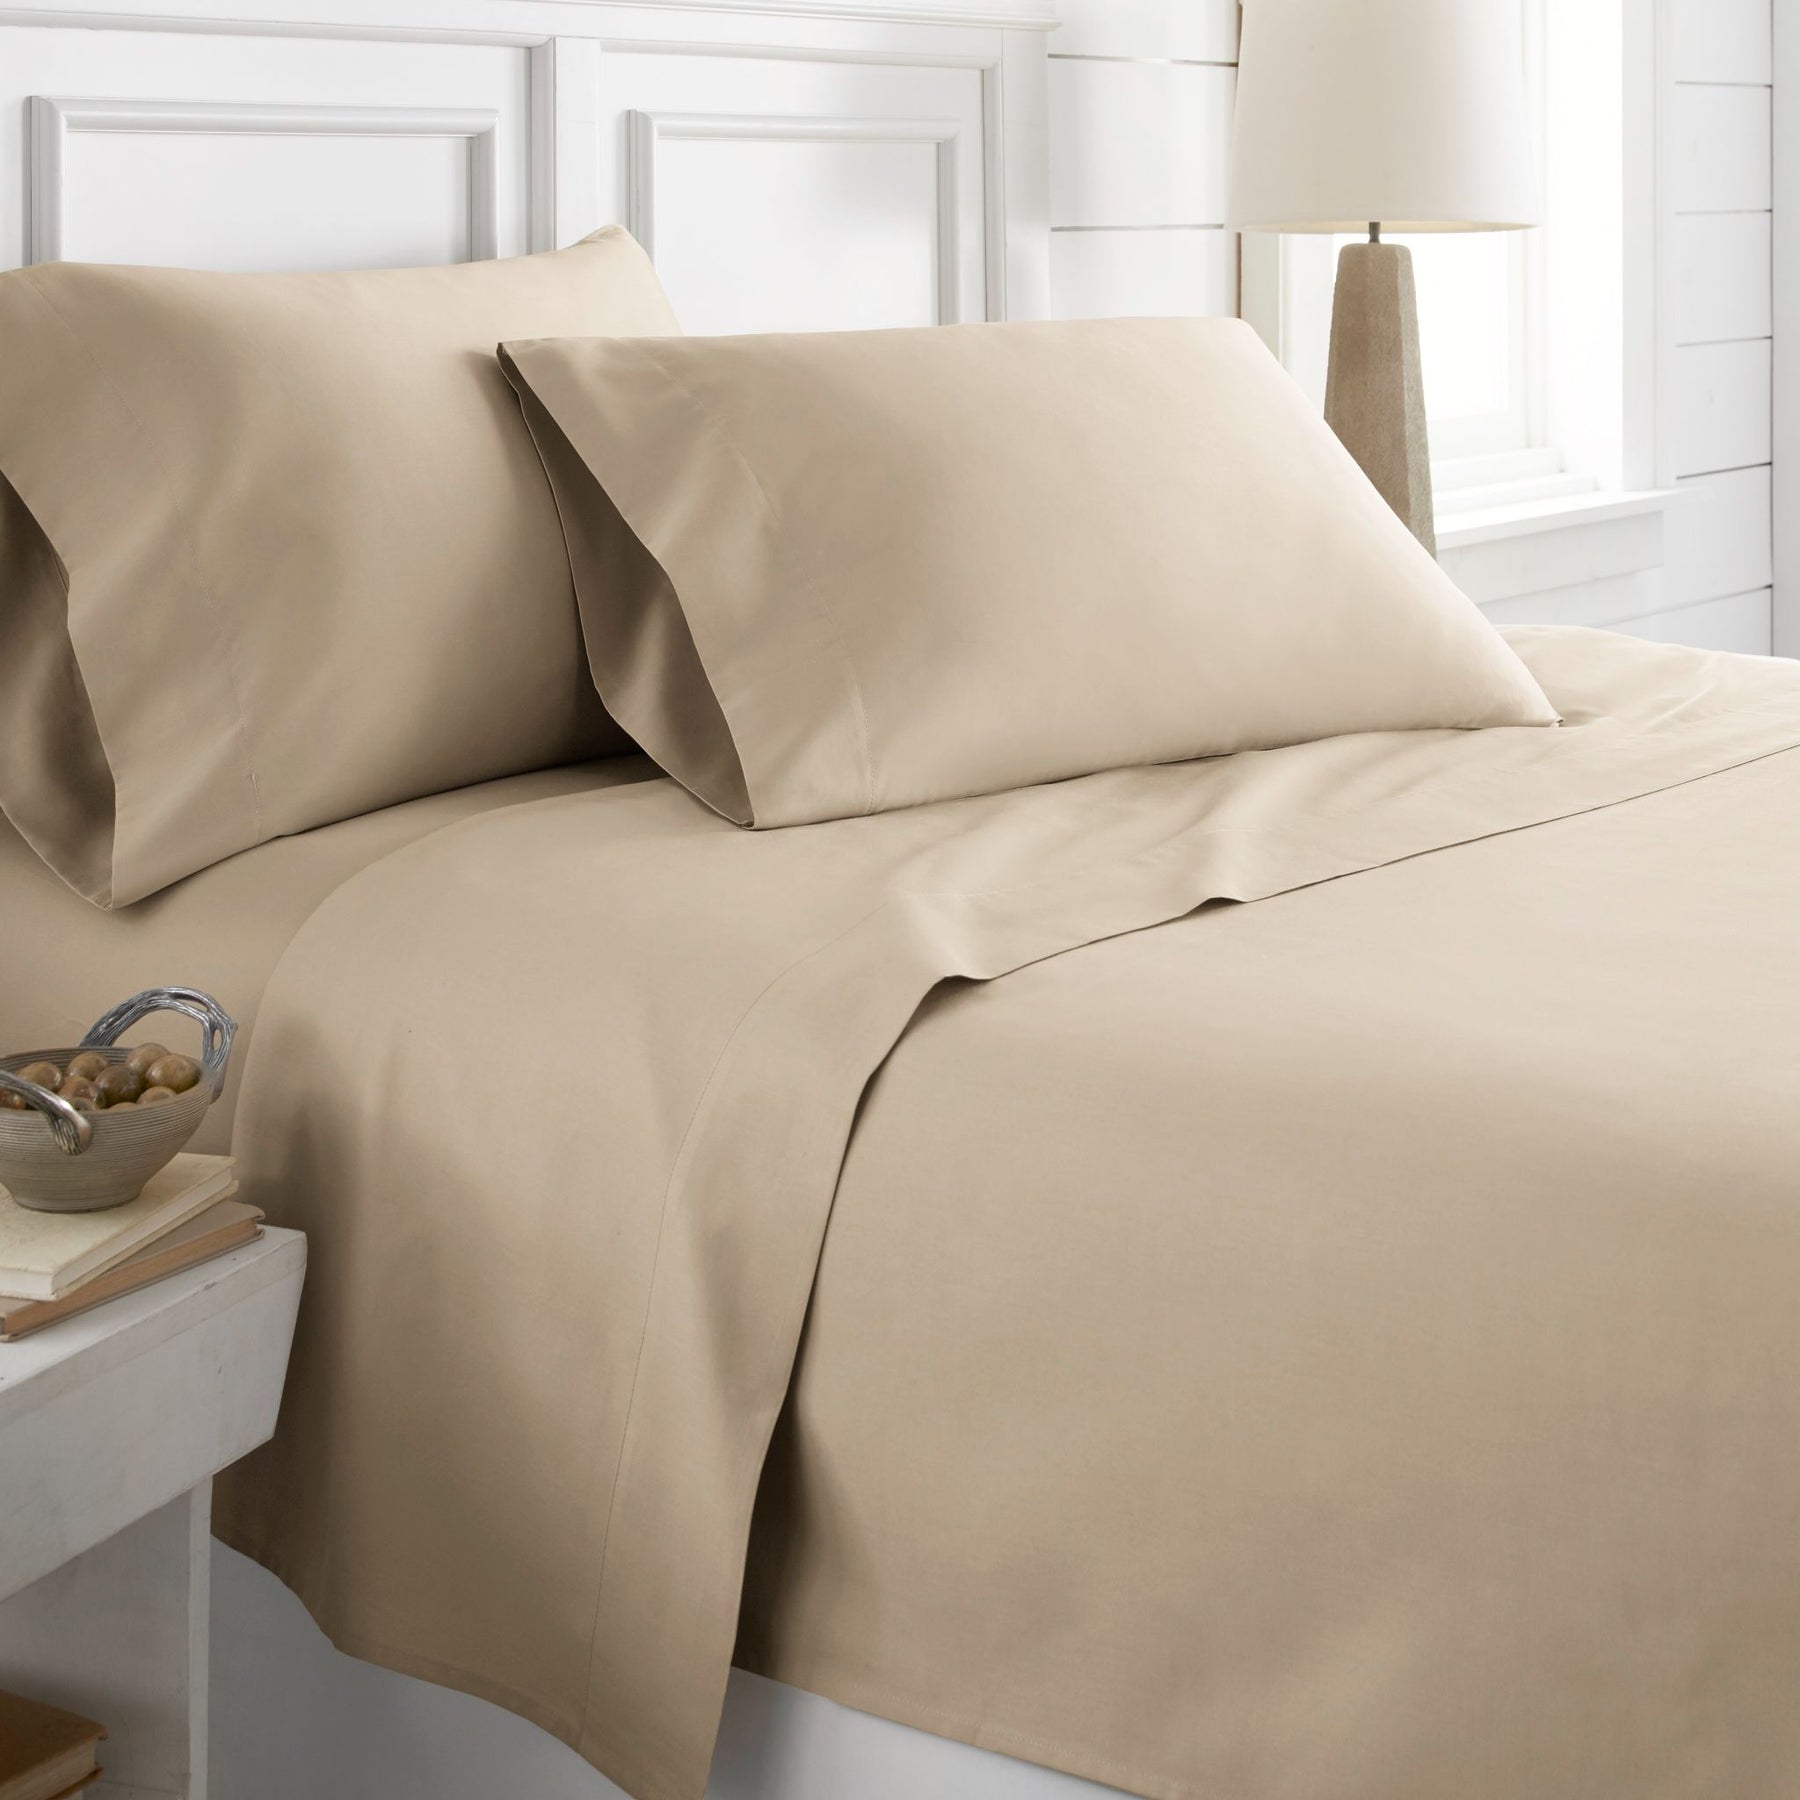 Royal Tradition Solid 600 Thread Count, 100-Percent Cotton Bed Sheets Inclu  シーツ、カバー